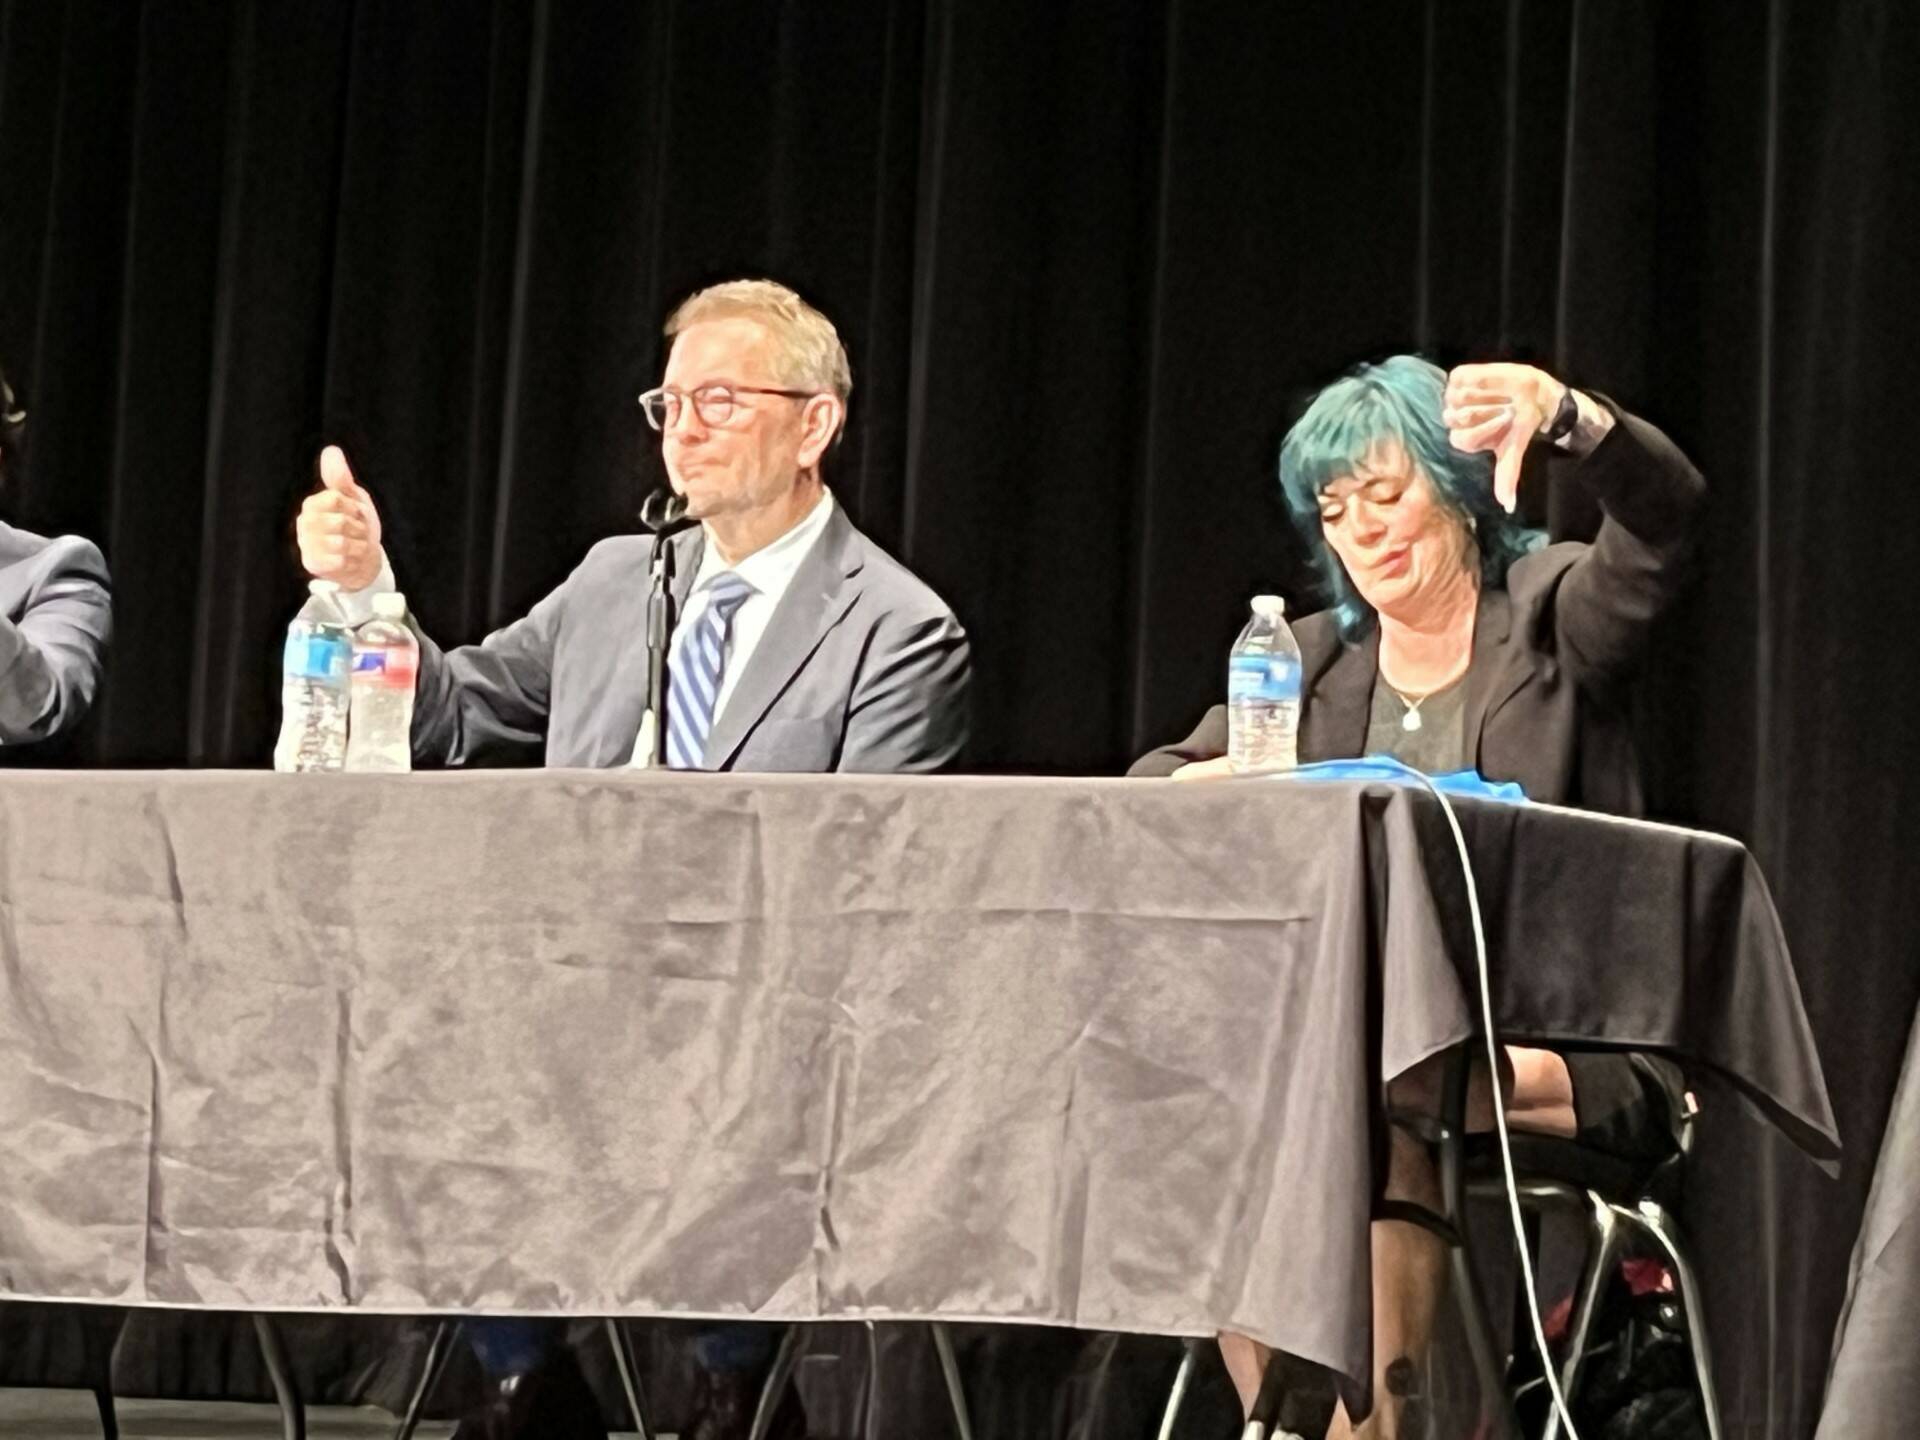 Renton Mayor Armondo Pavone, left, and challenger Kim Monroe Bass at the Renton candidates forum held Sept. 19 at the Carco Theatre. Candidates for council positions 3, 4, 5 and 7 also answered questions about local issues from moderator Diane Dobson of the Renton Chamber of Commerce. (Renton Reporter photo)